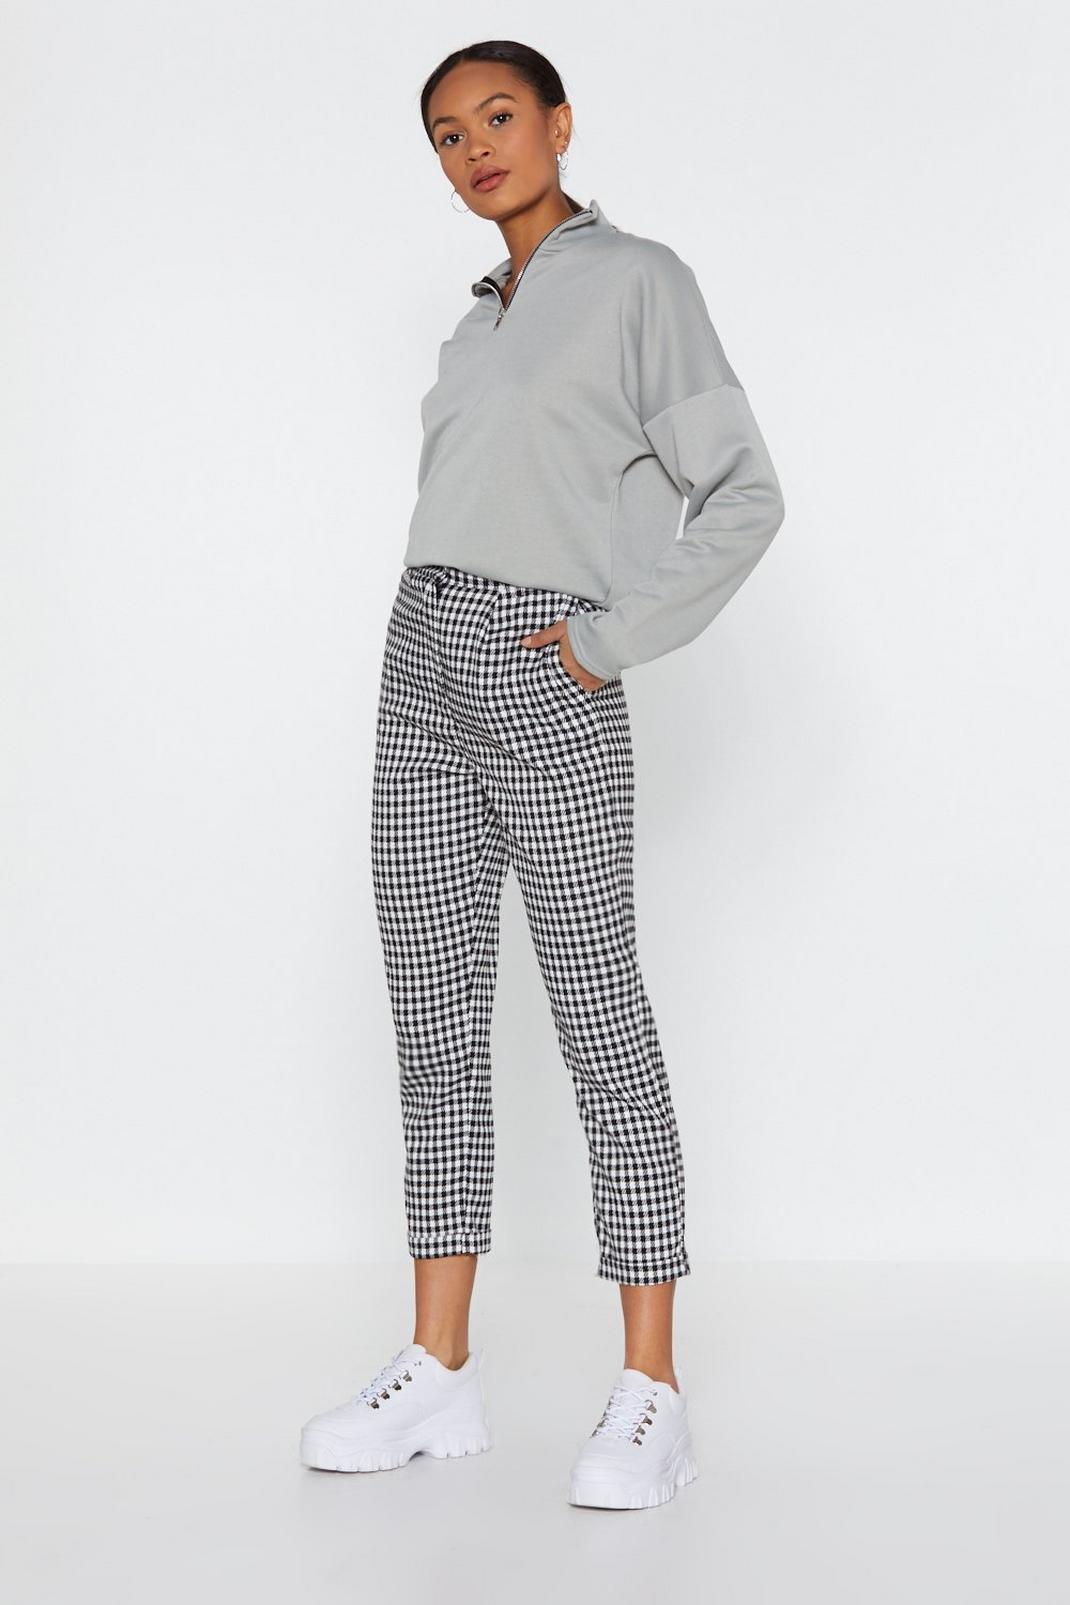 Square Do's Gingham Trousers image number 1